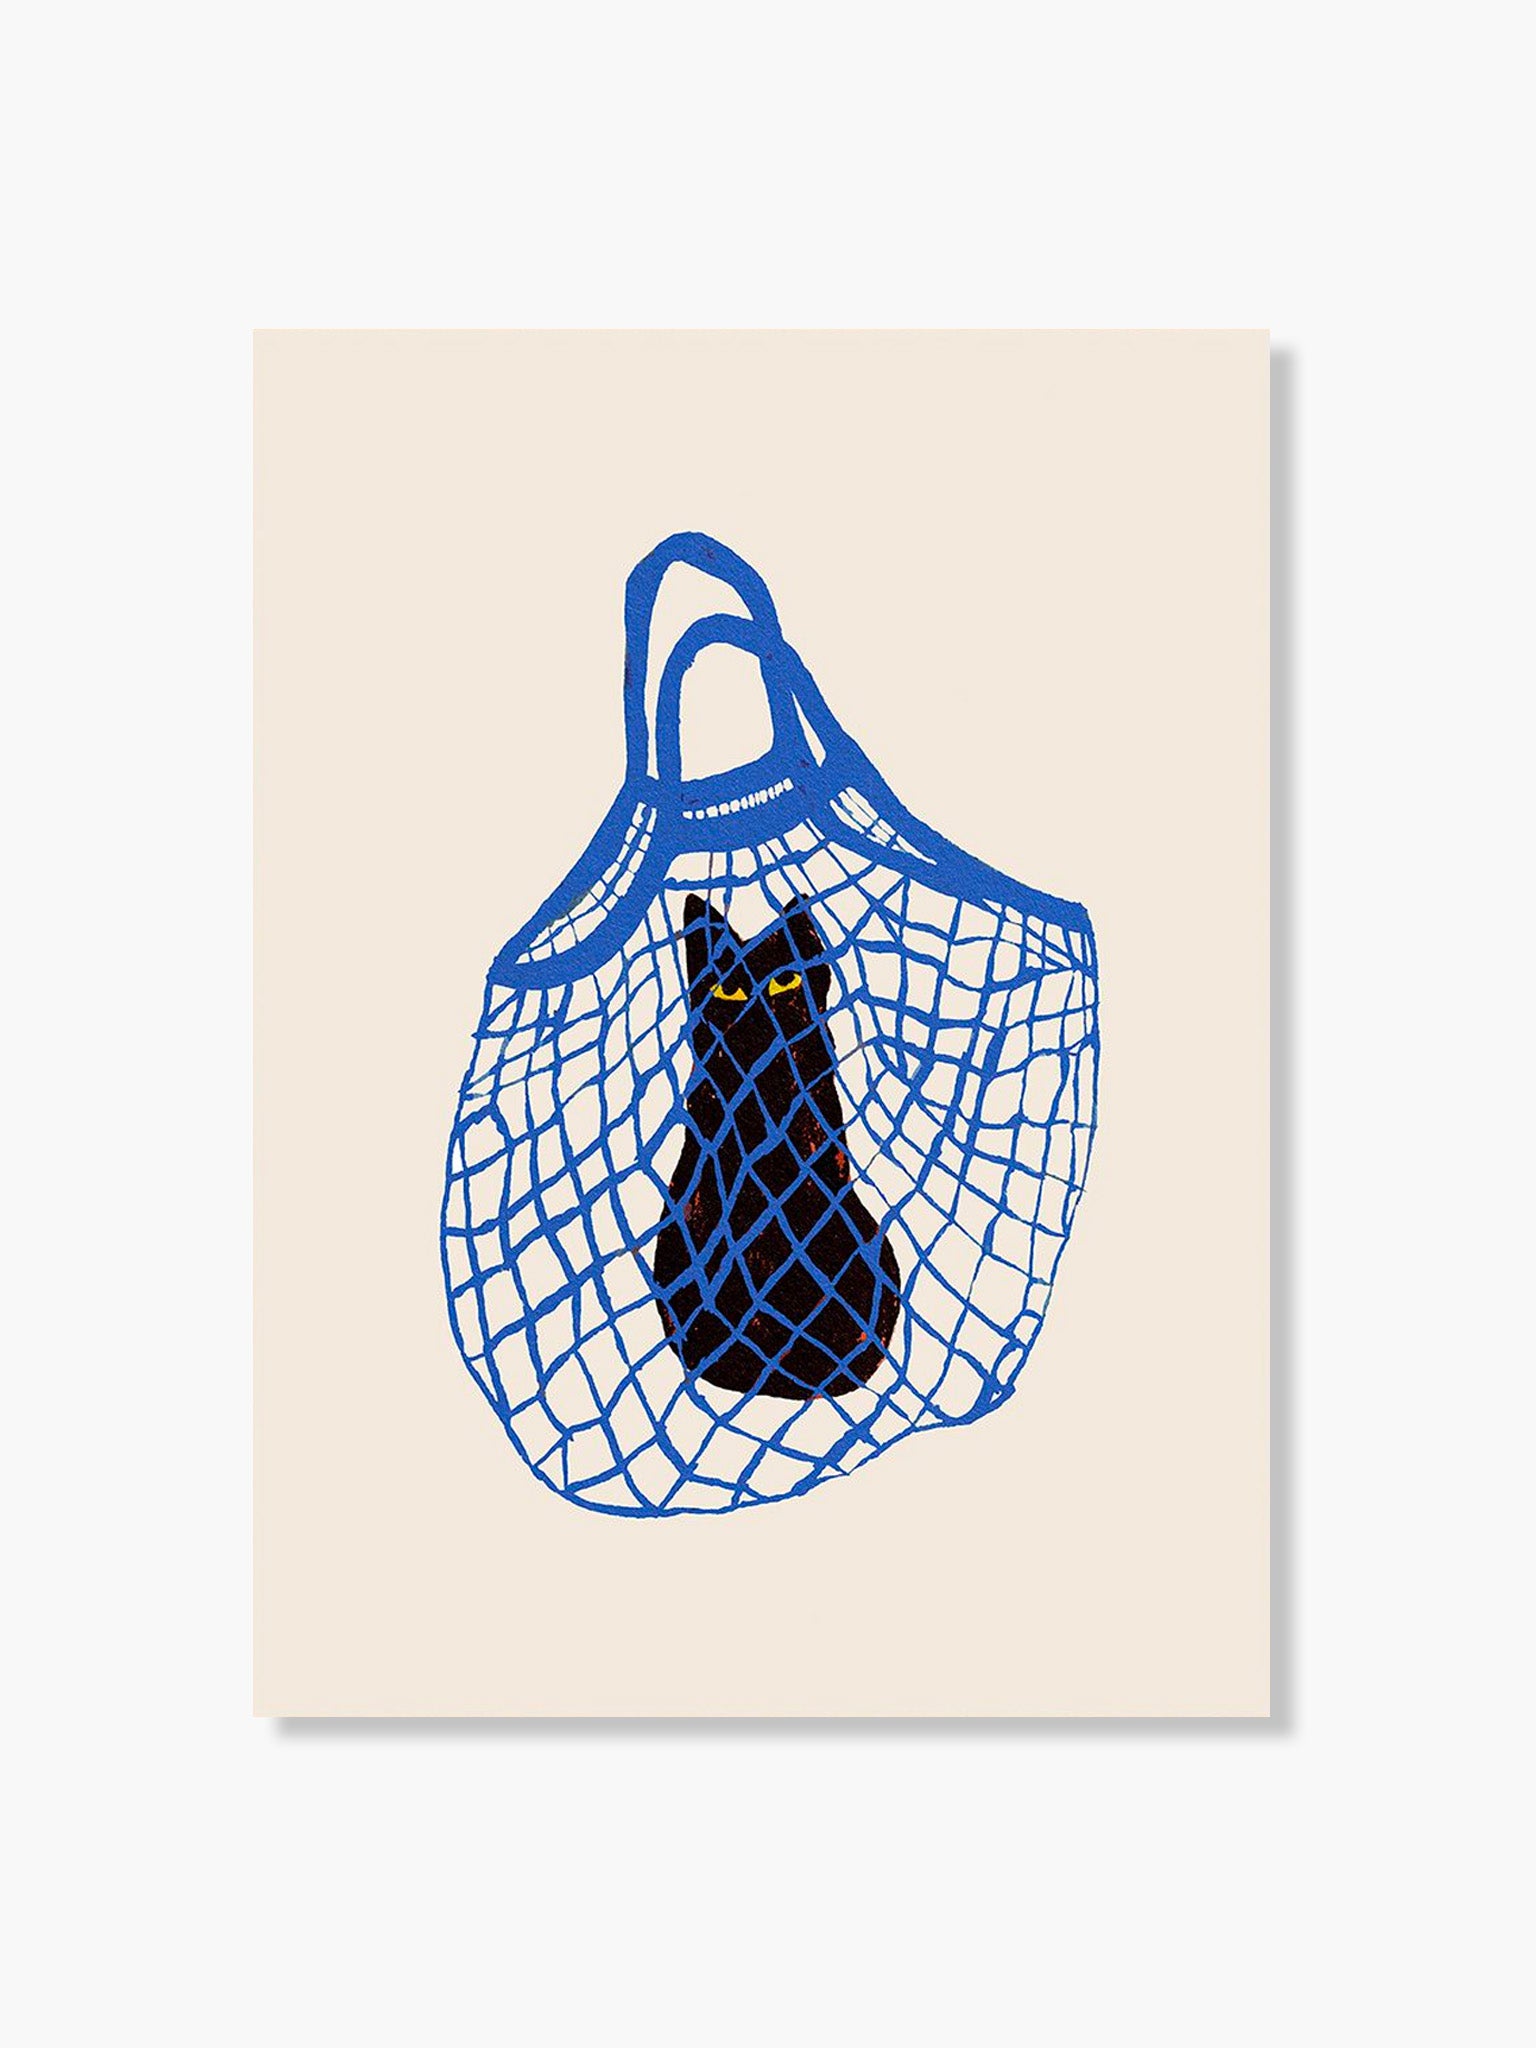 The Cat's in the Bag by Chloe Purpero Johnson (A4)